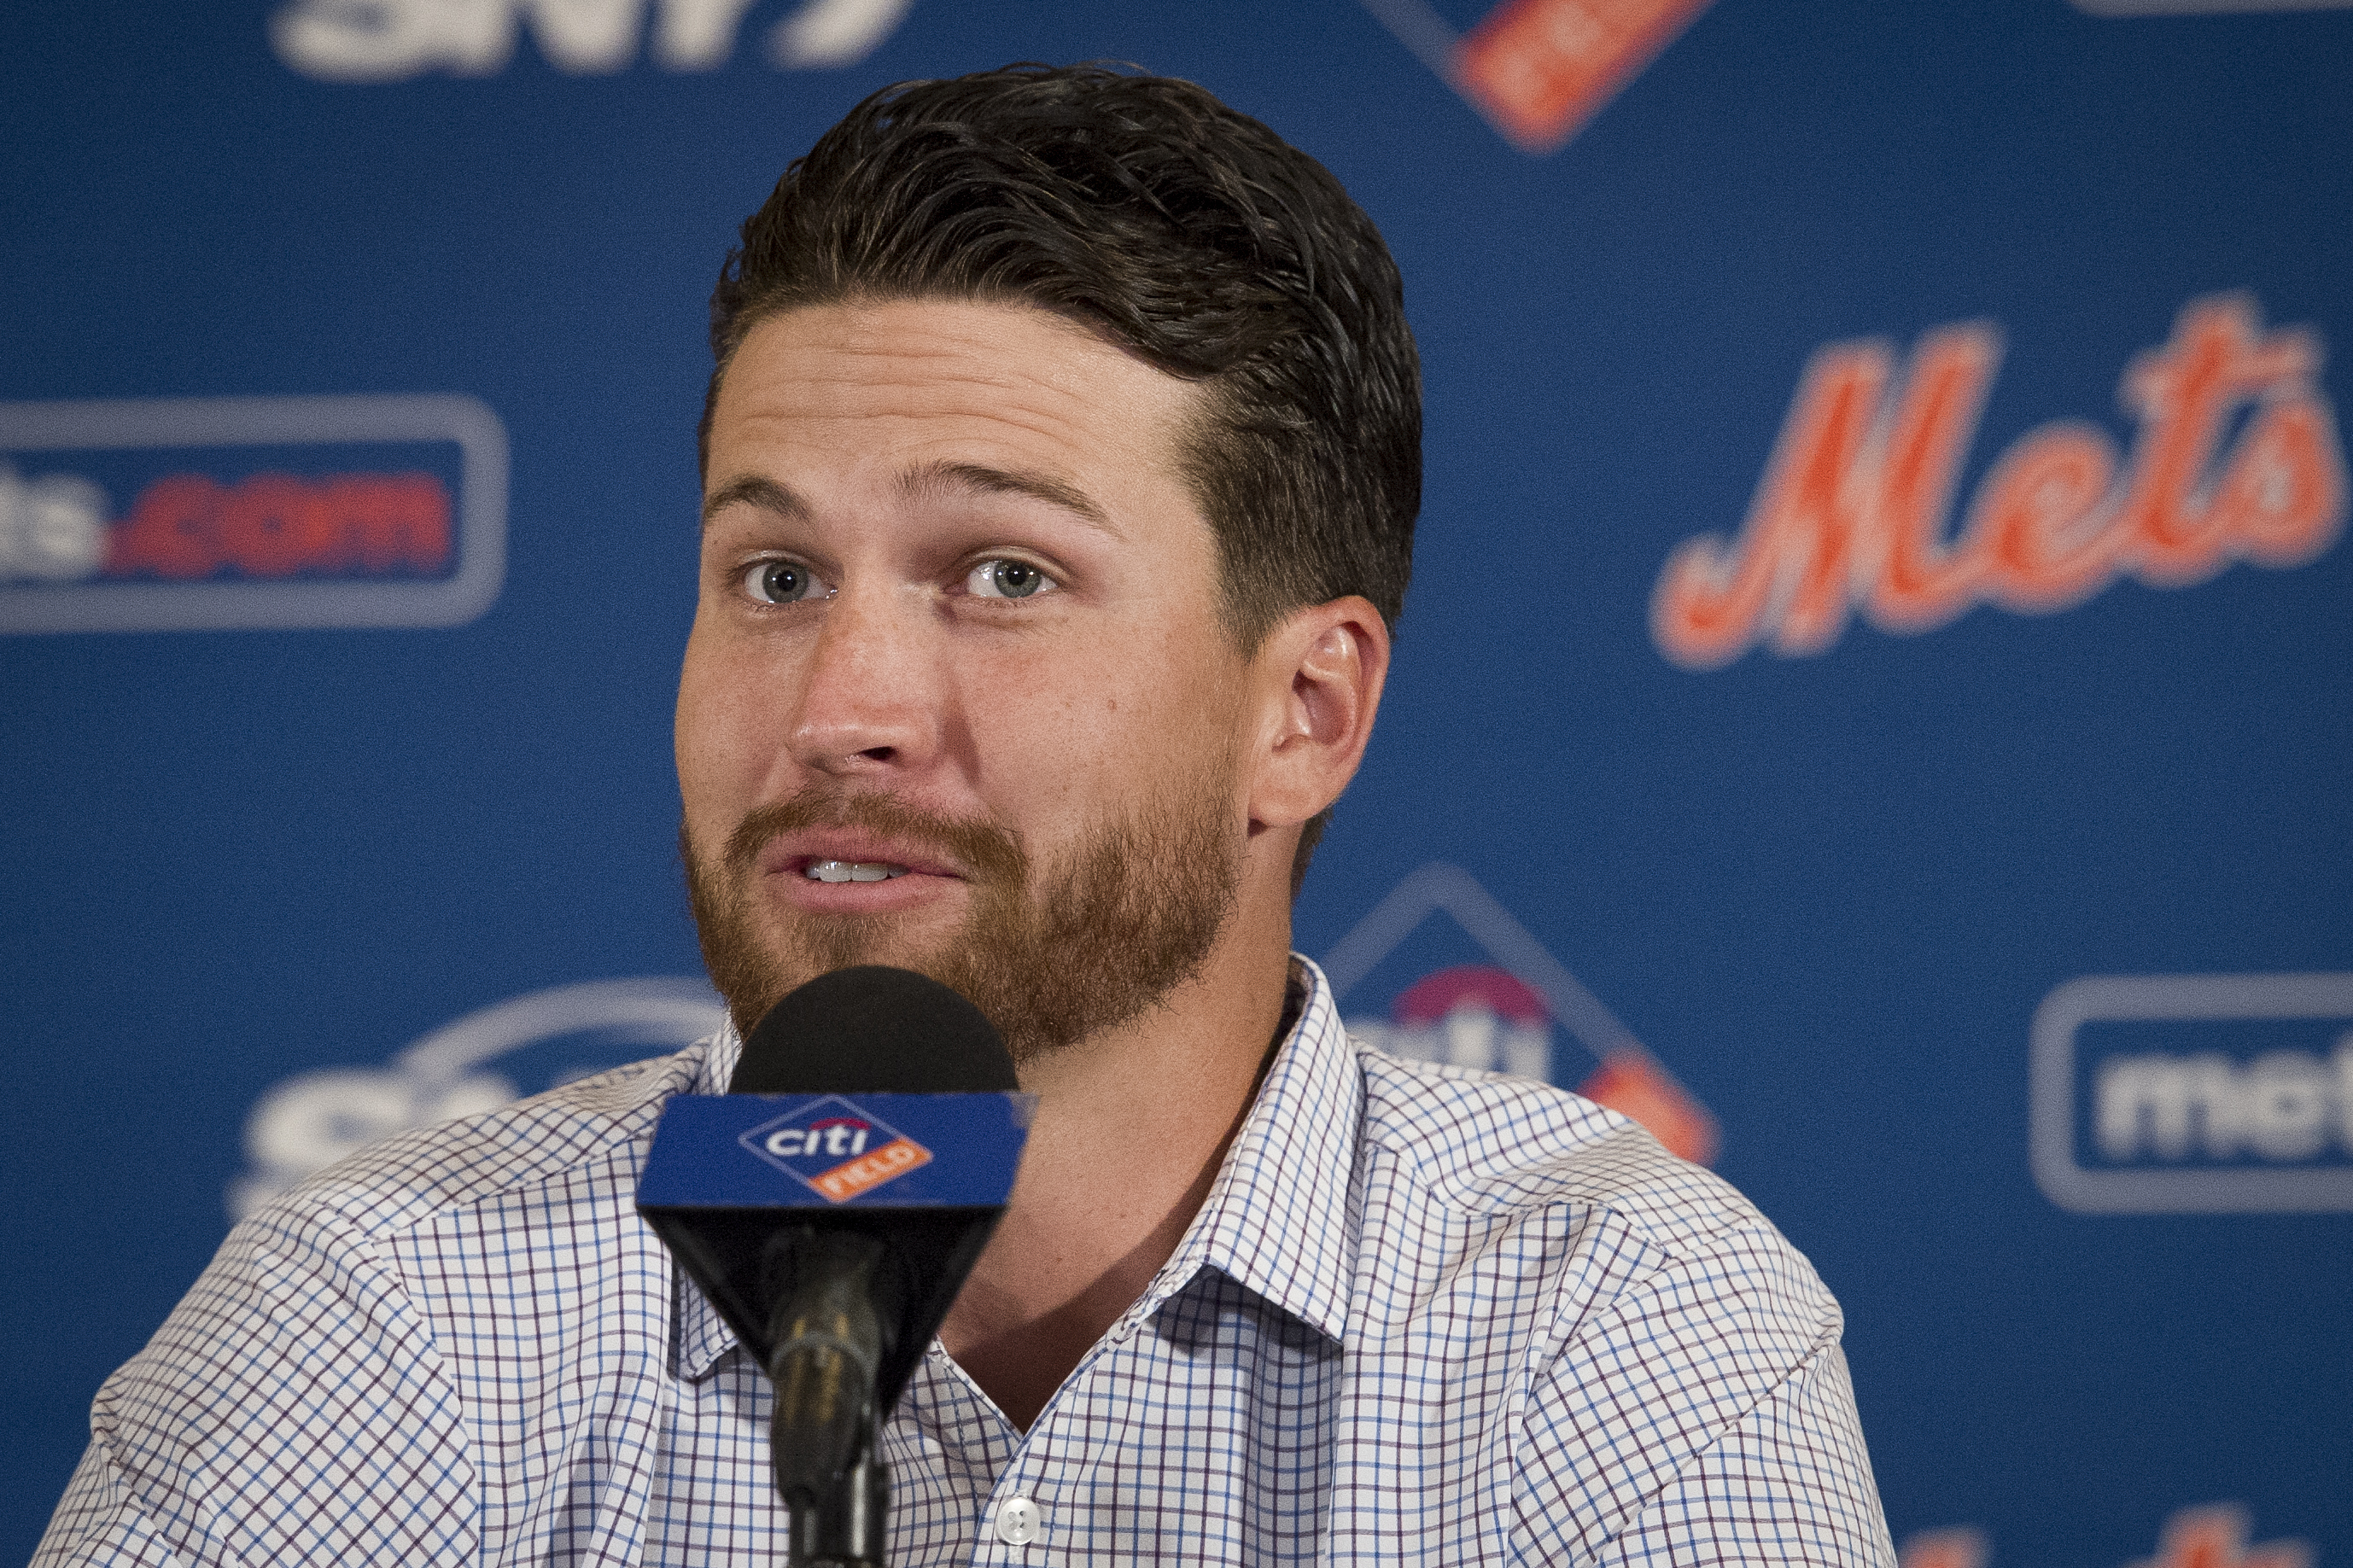 20-cent 7-Eleven tacos fueled deGrom’s $137M deal with Mets